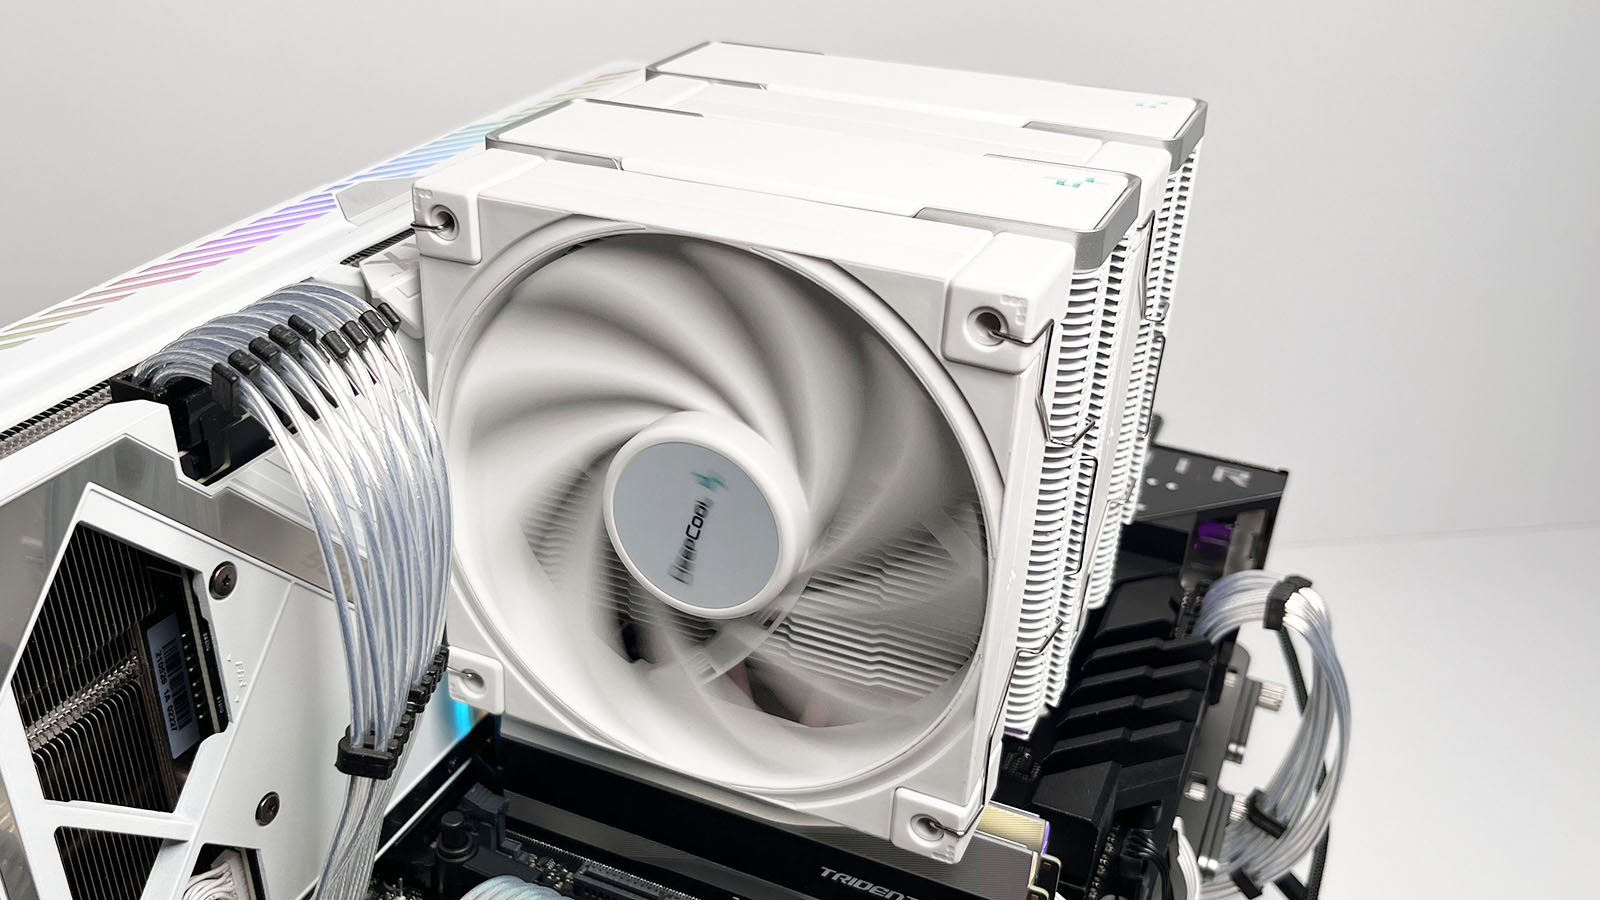 DeepCool AK620 CPU Cooler Review, Page 4 of 5